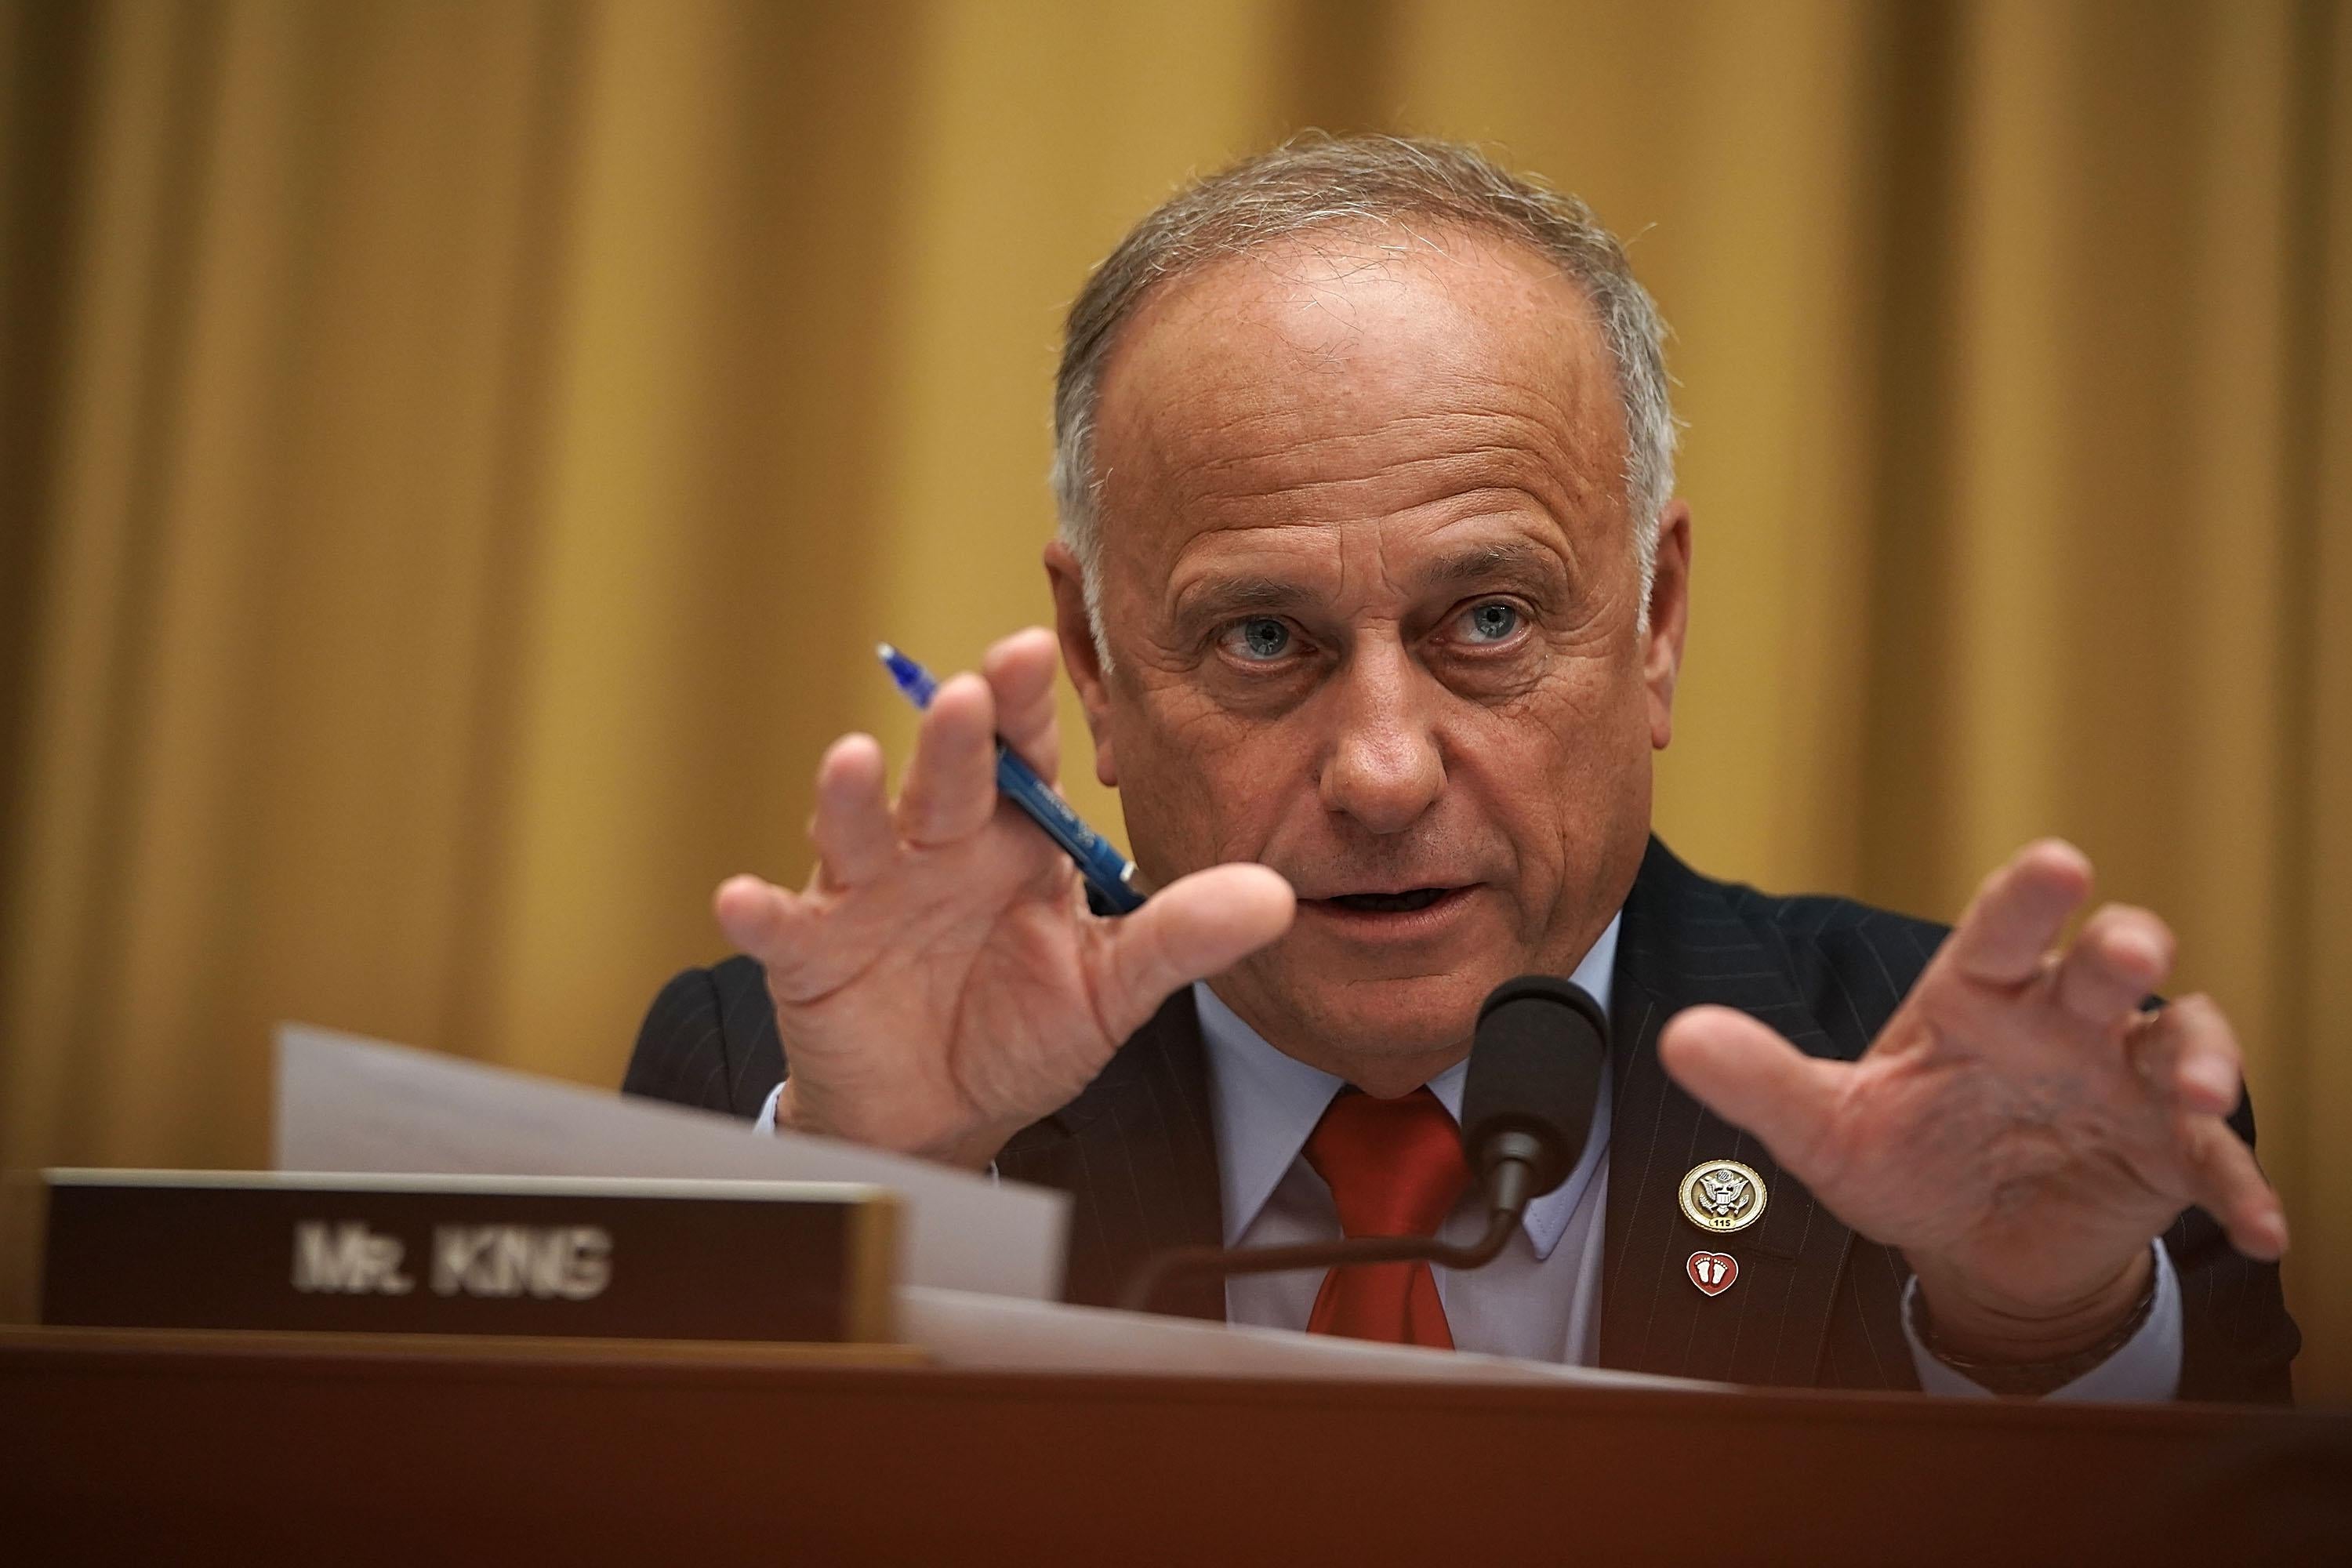 Rep. Steve King speaks during a hearing before the House Judiciary Committee June 28, 2018 on Capitol Hill in Washington, DC.